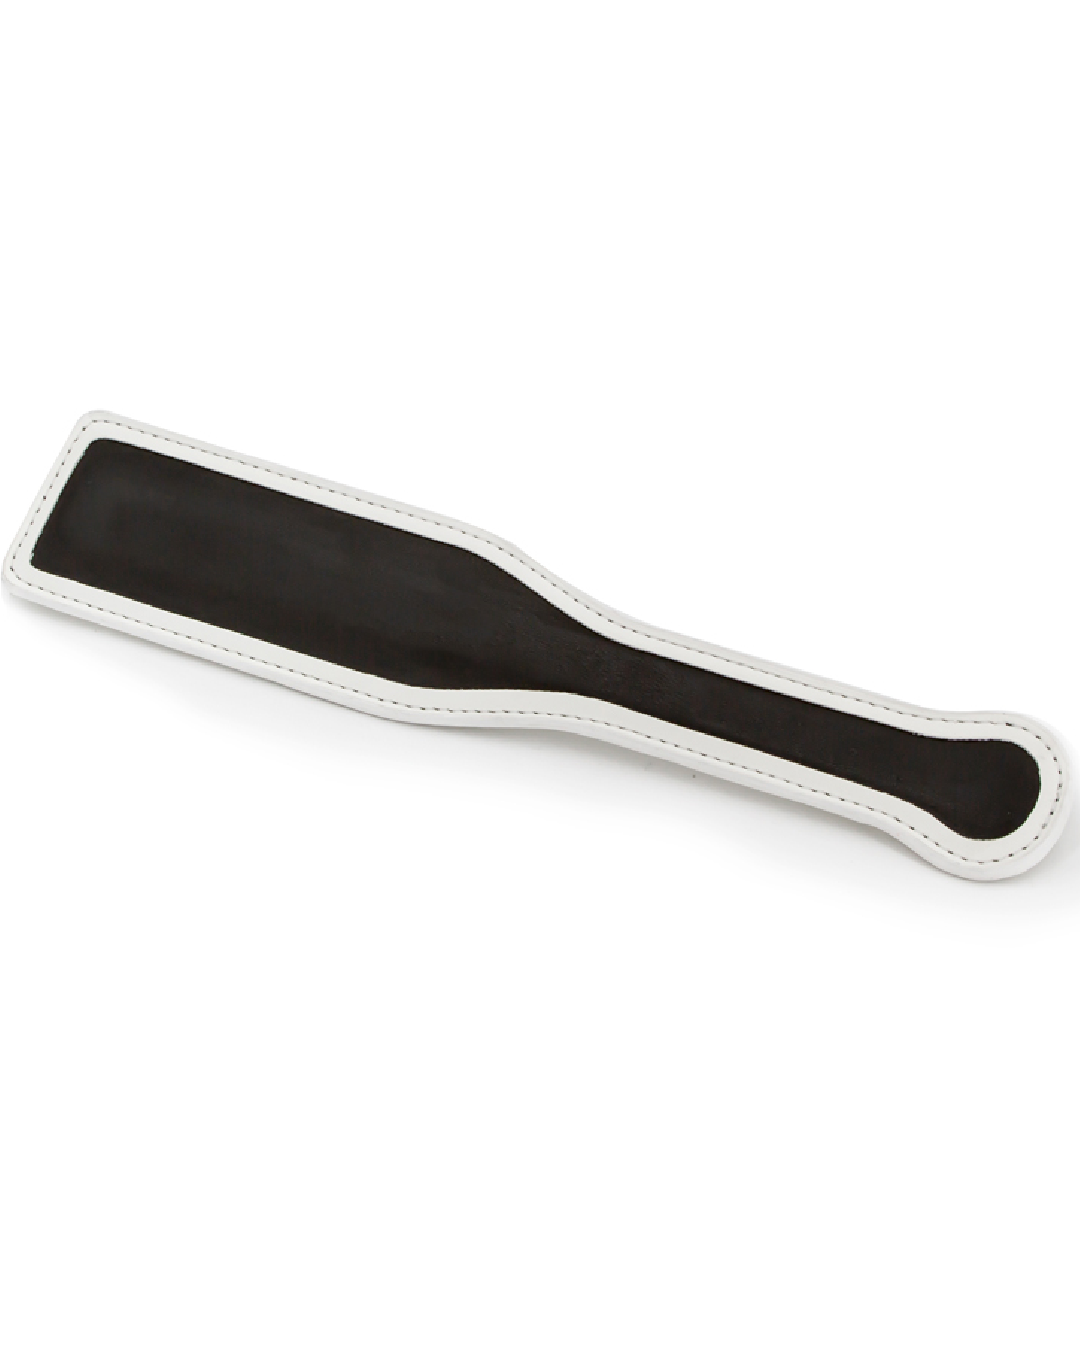 Black paddle with white trim on white background 